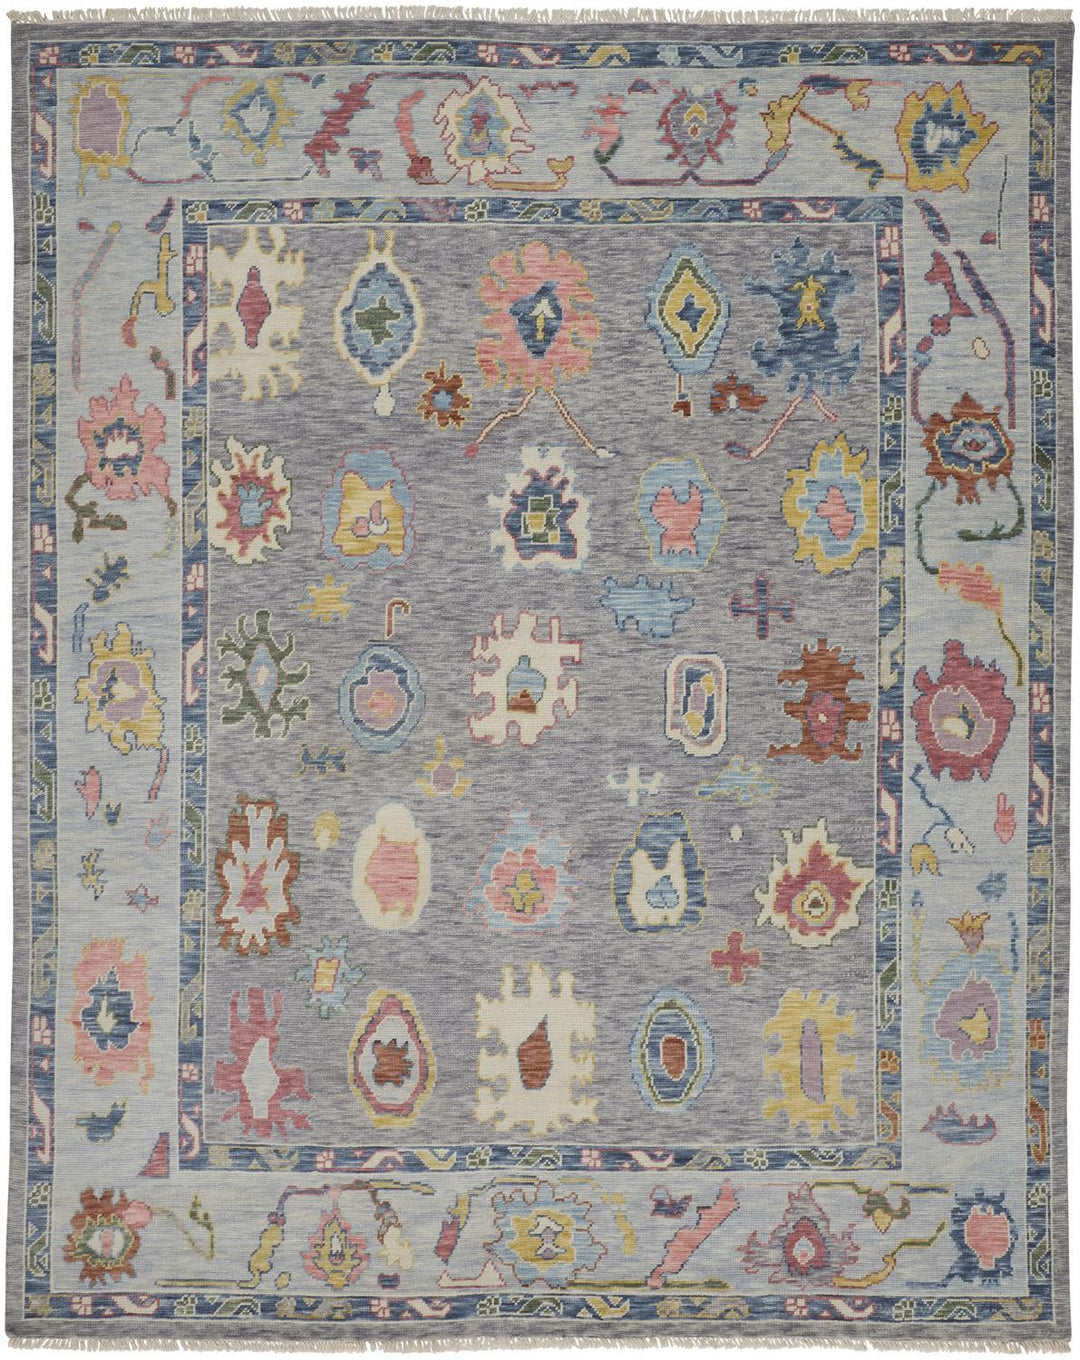 Feizy Karina Luxe Hand Knot Botanical Rug - Cool Gray & Blue - Available in 7 Sizes